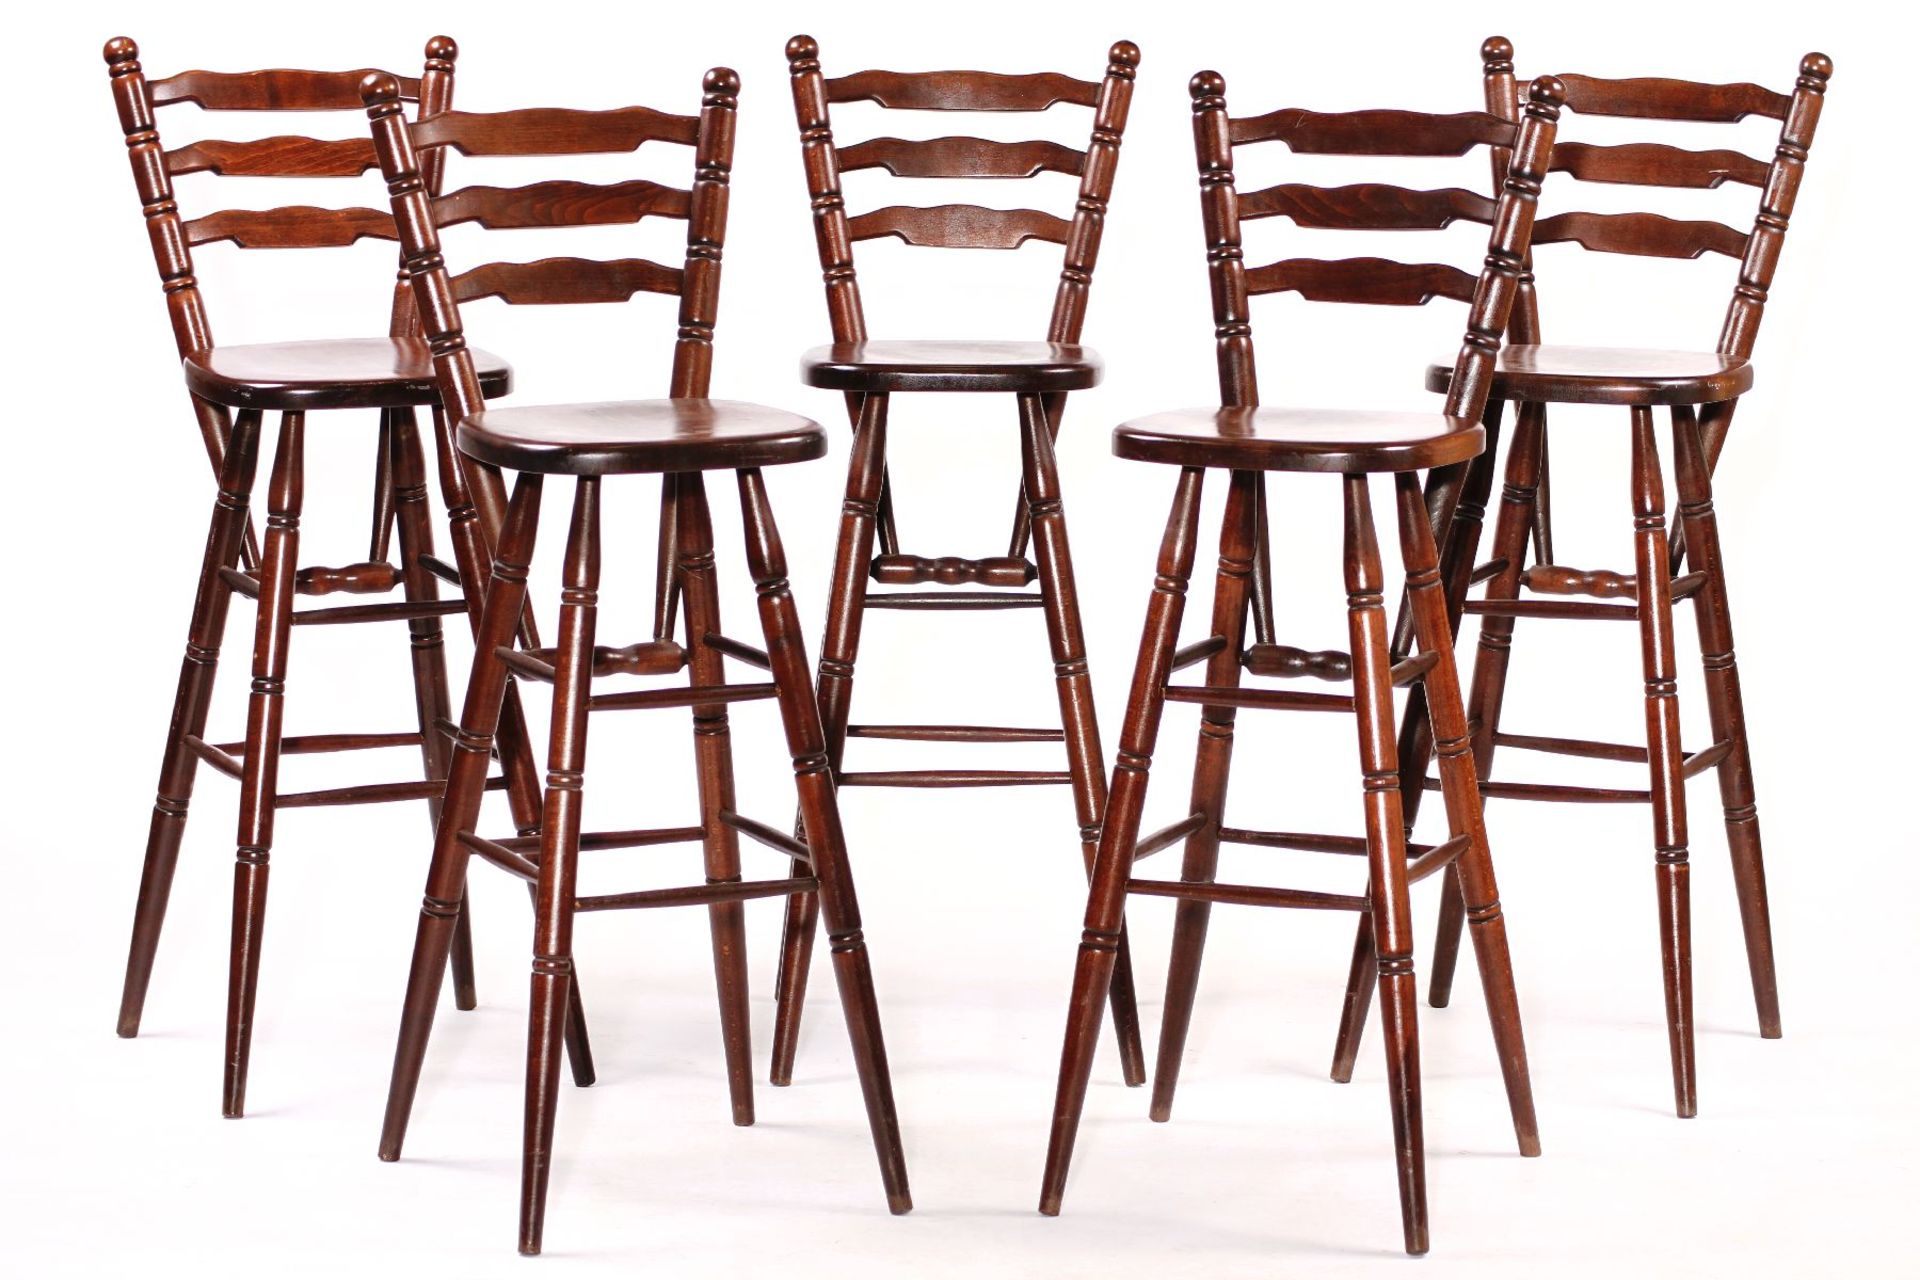 5 bar stools, solid wood, stained dark brown, stable workmanship, traces of use, each approx.